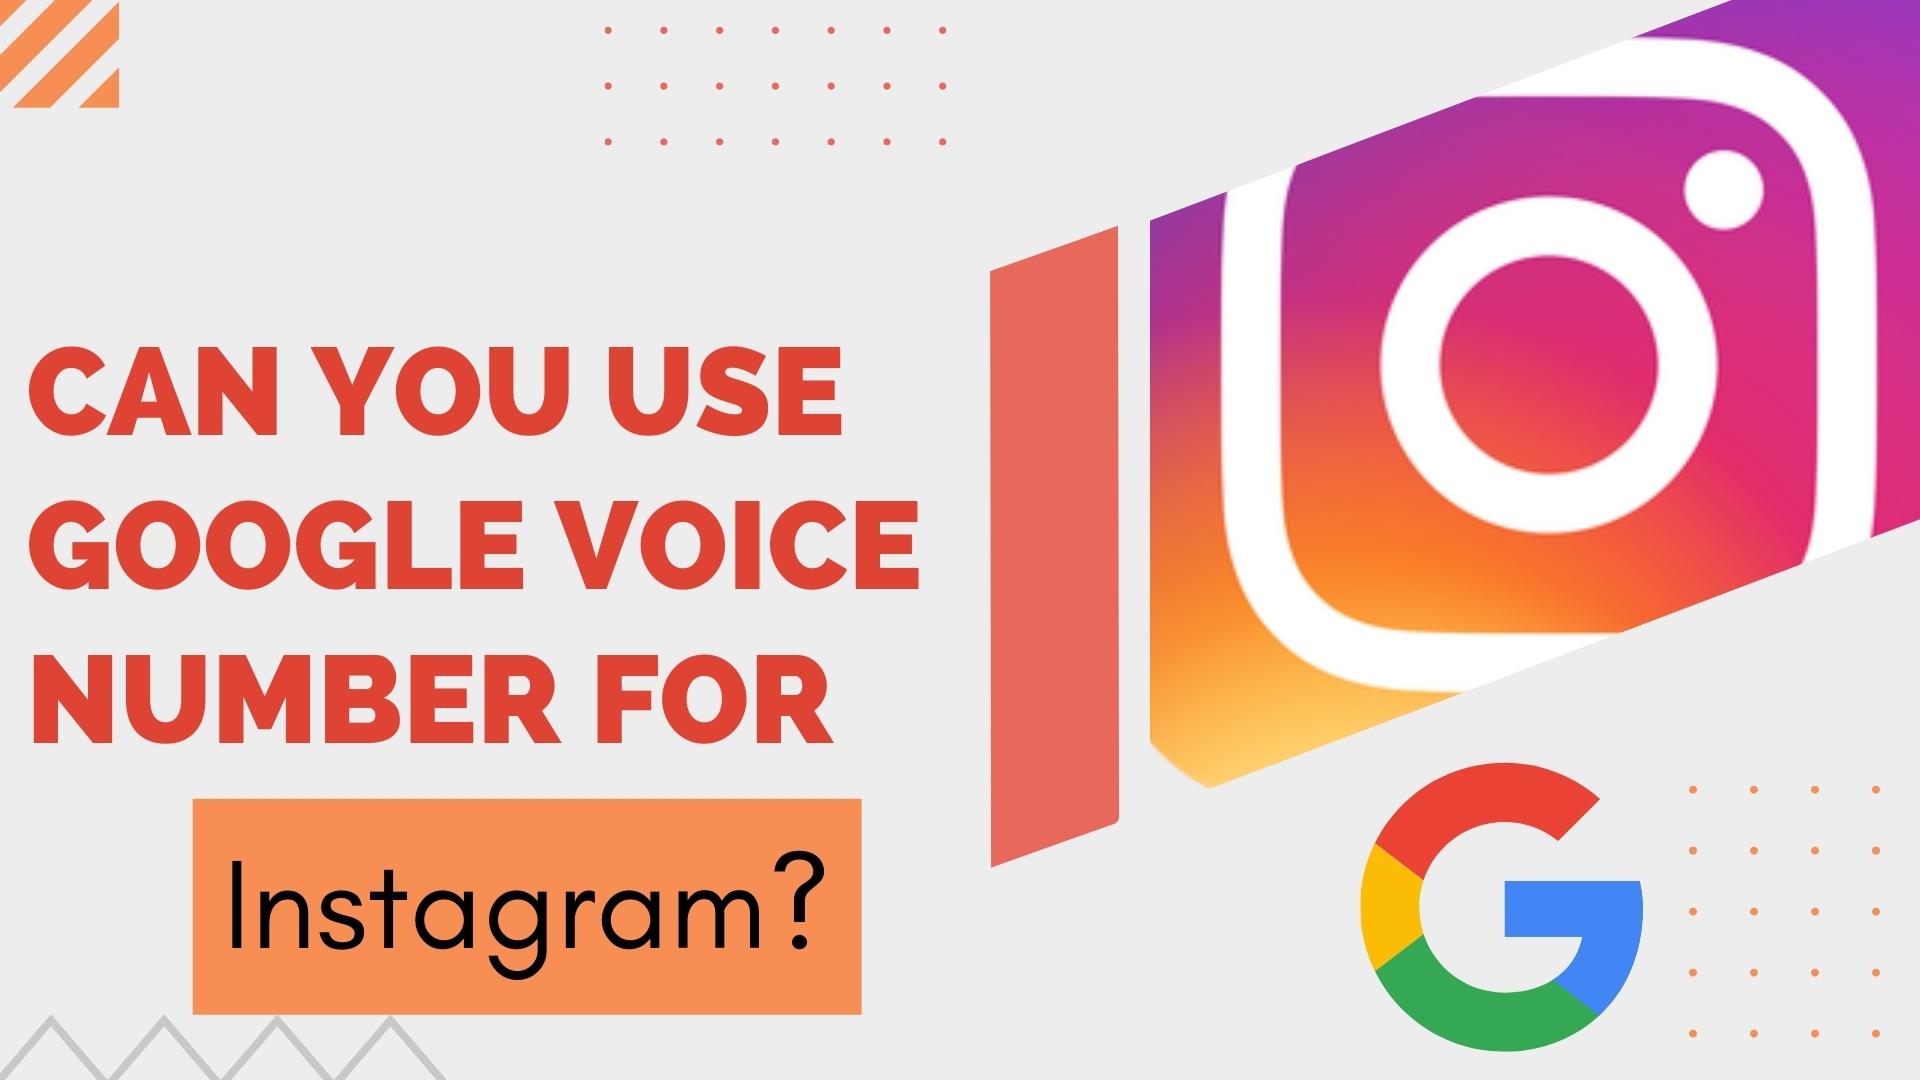 Can you use google voice number for Instagram?